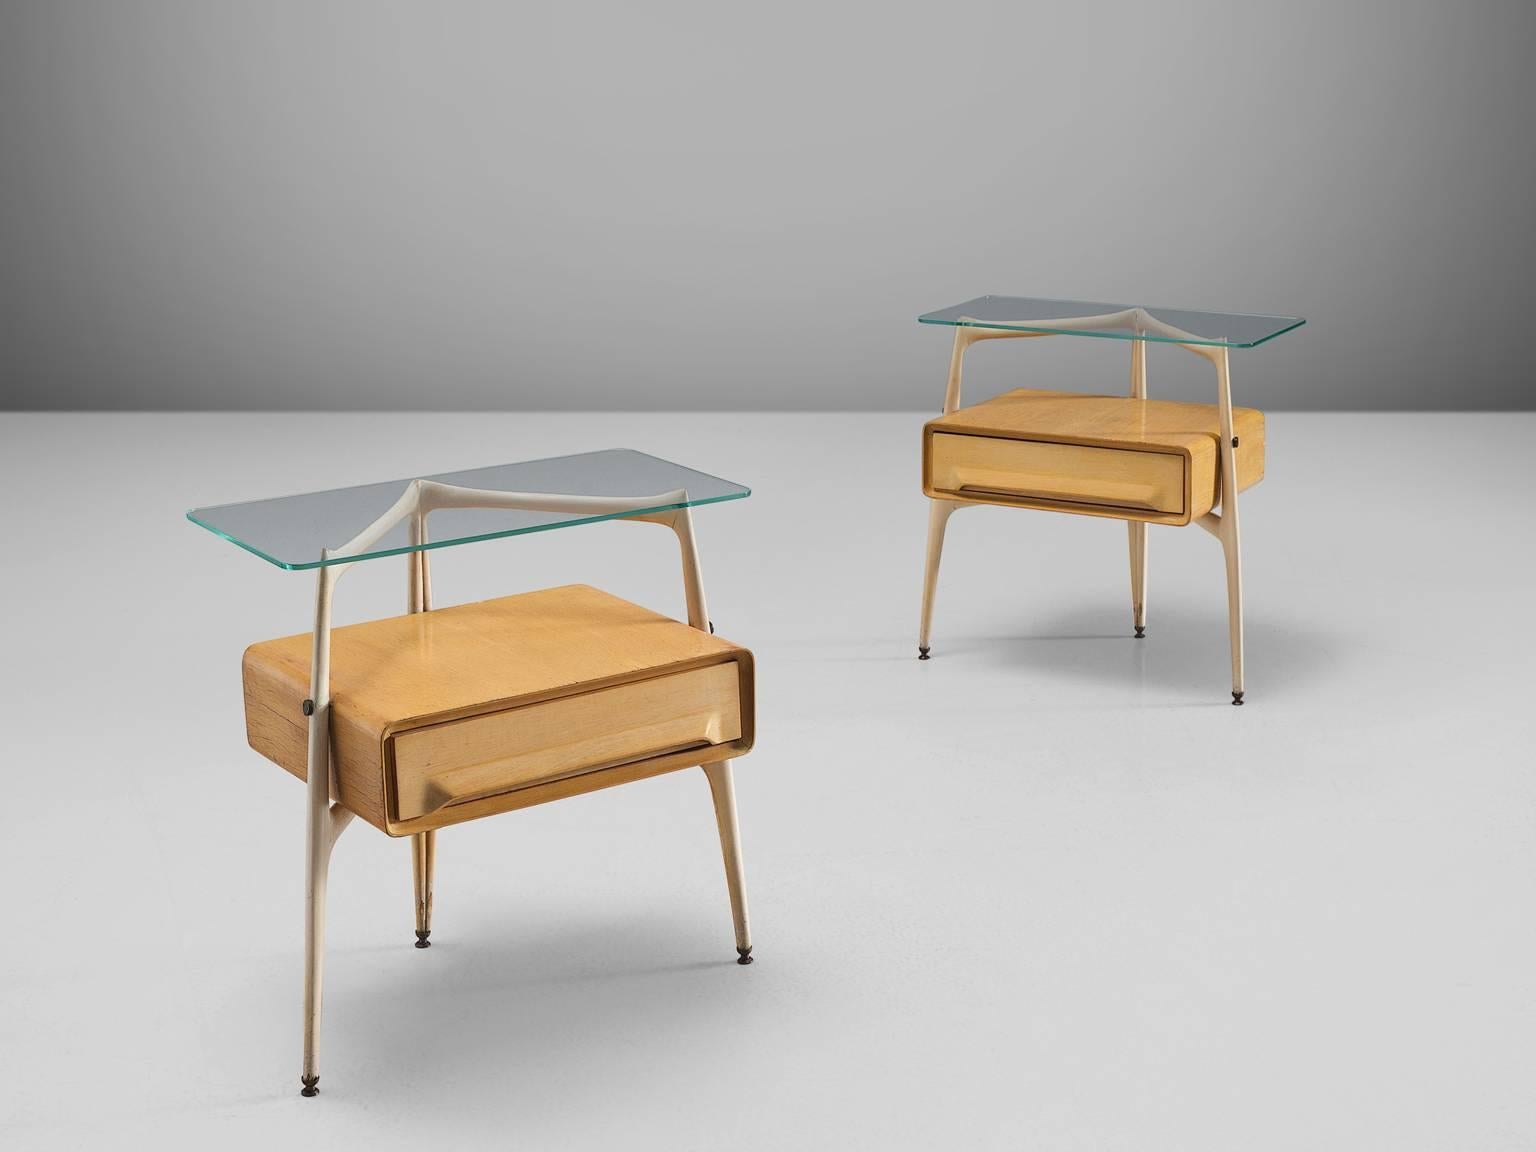 Silvio Cavatorta, maple and beech, brass, glass, Italy, 1950s.

These two delicate and sculptural bedside tables are designed by the Italian Silvio Cavatorta. They are part of the midcentury design collection. The little maple cabinets feature one